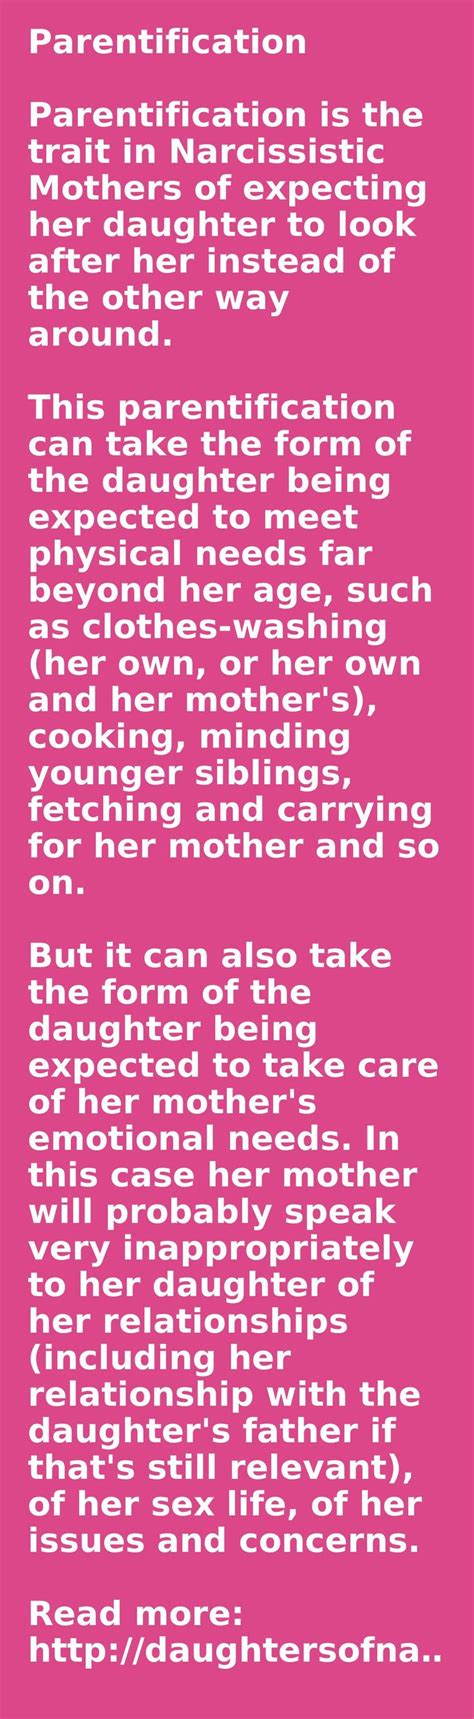 98 best images about narcissistic mother in law on pinterest narcissist relationships and